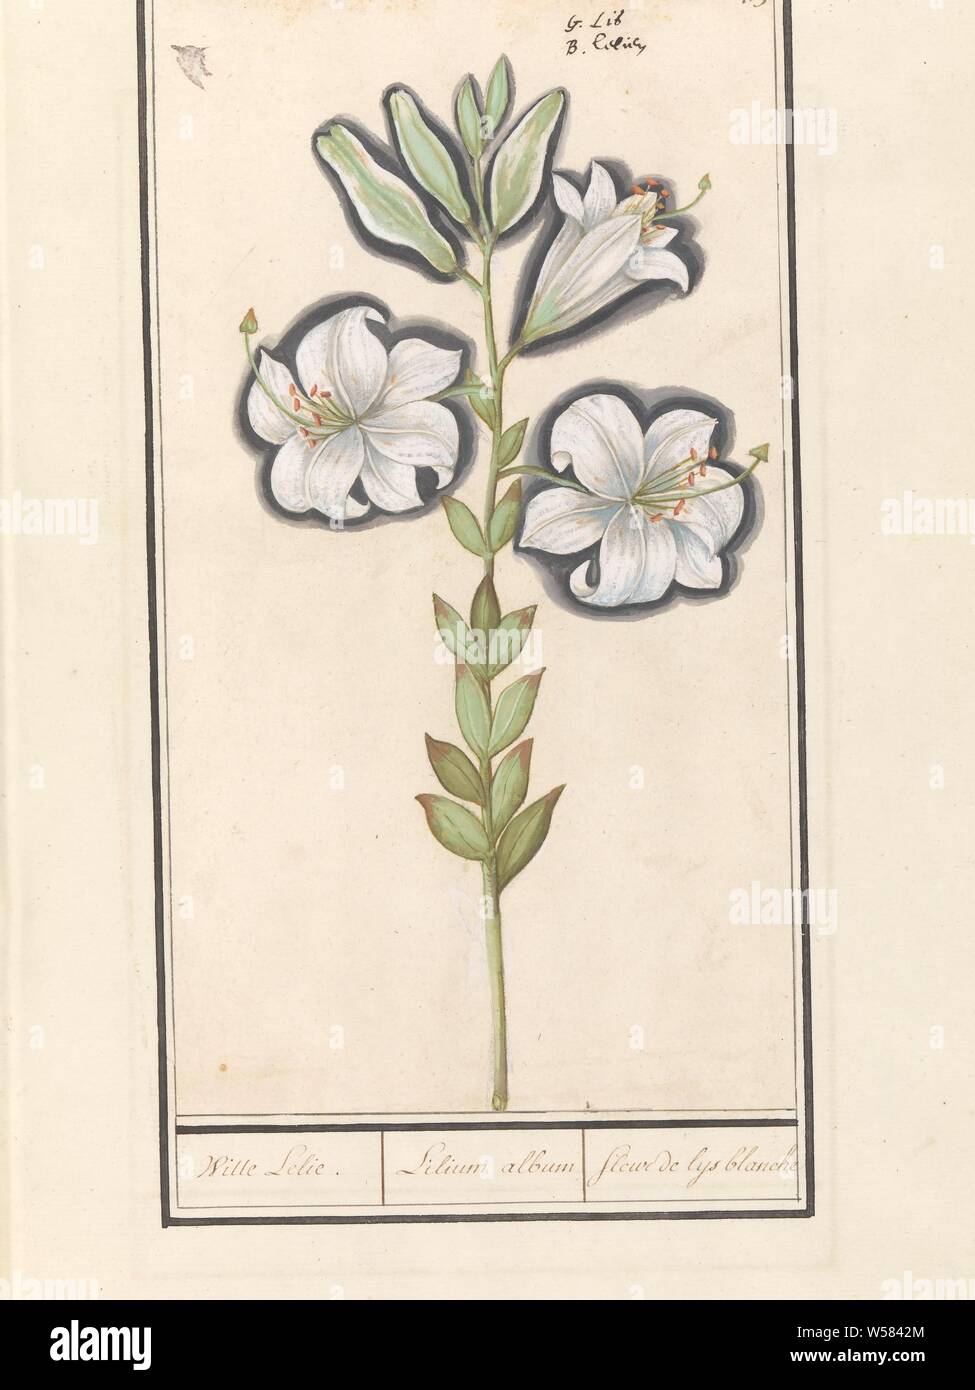 White lily (Lilium candidum) White lily. / Lilium album / Fleur de lys  blanche (title on object), White lily. Numbered top right: 179. At the top  the name in two languages. Part